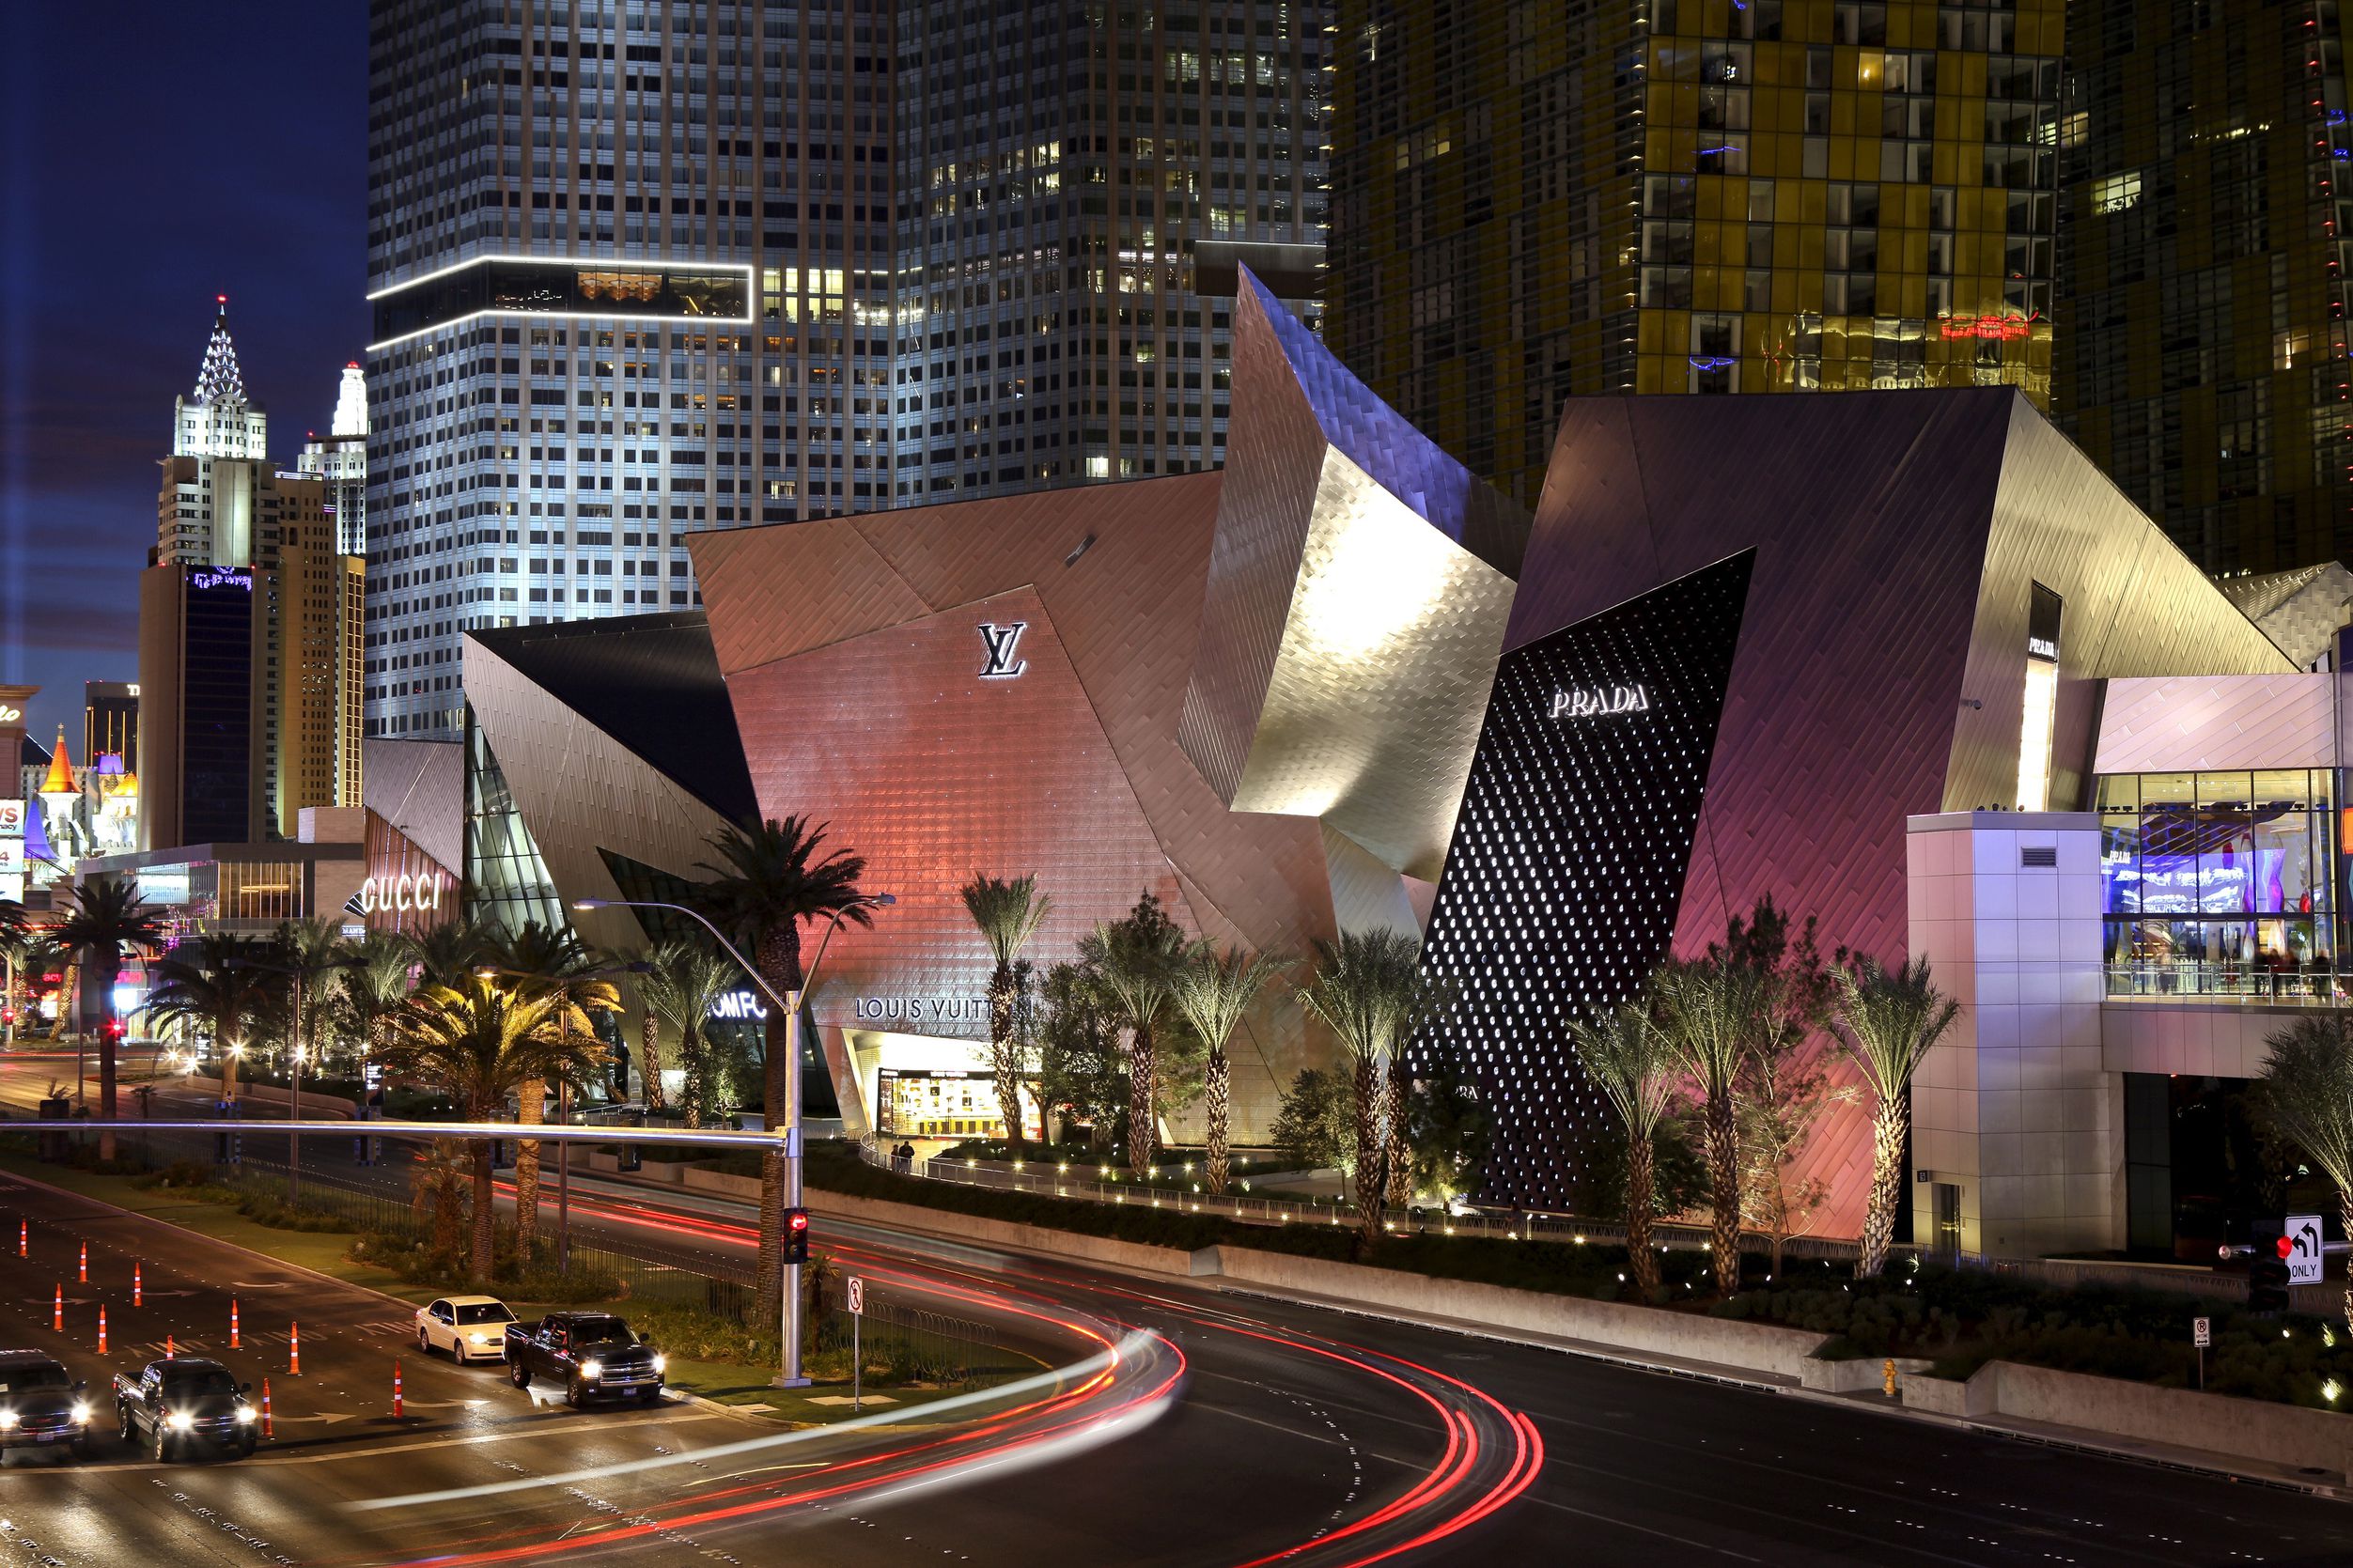 10 Things You'll Only Find at The Shops at Crystals in Las Vegas